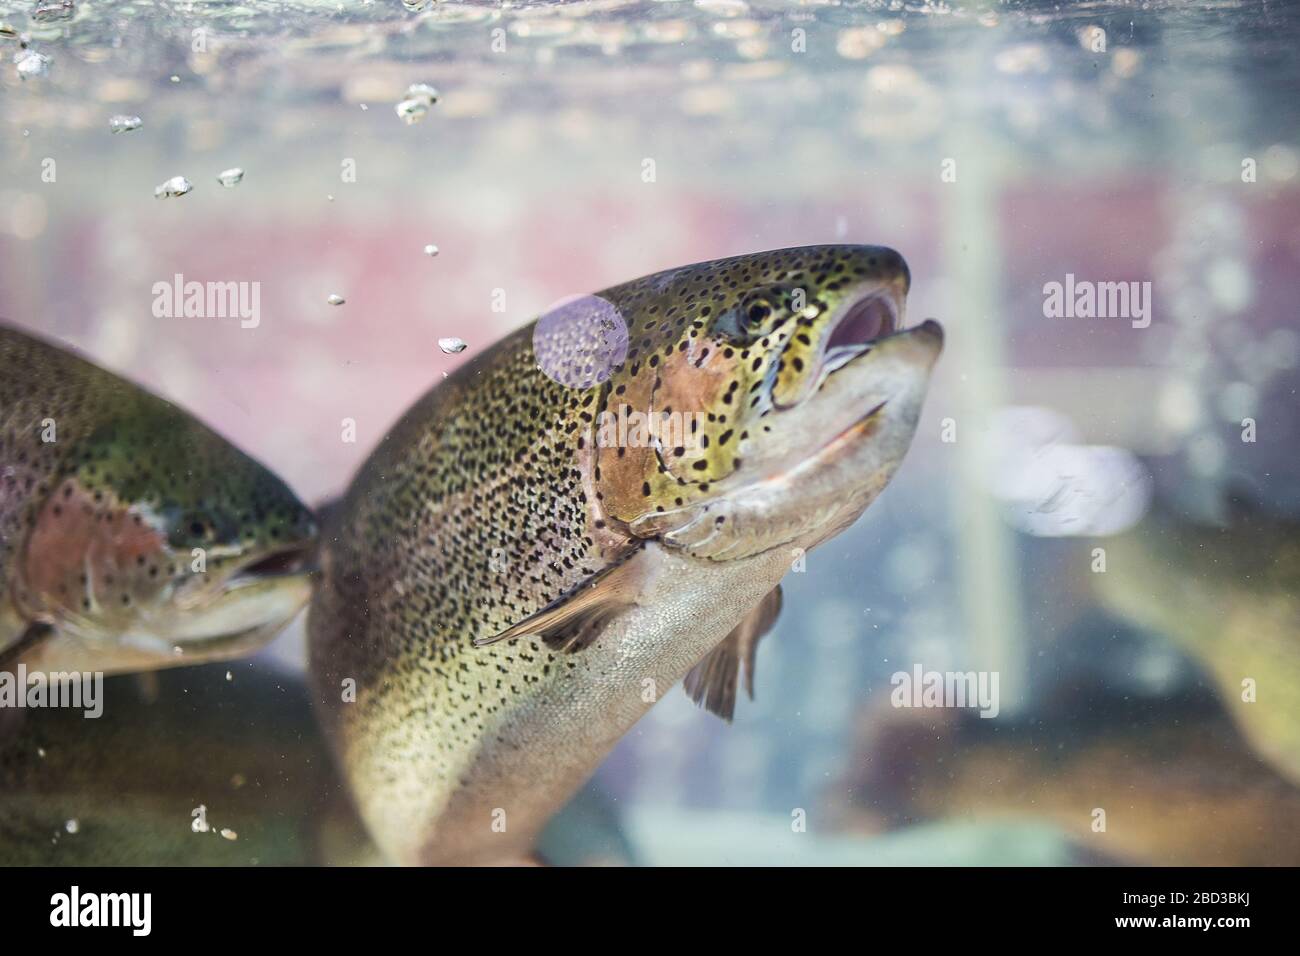 Steelhead trout or Rainbow trout close-up floating under water background Stock Photo